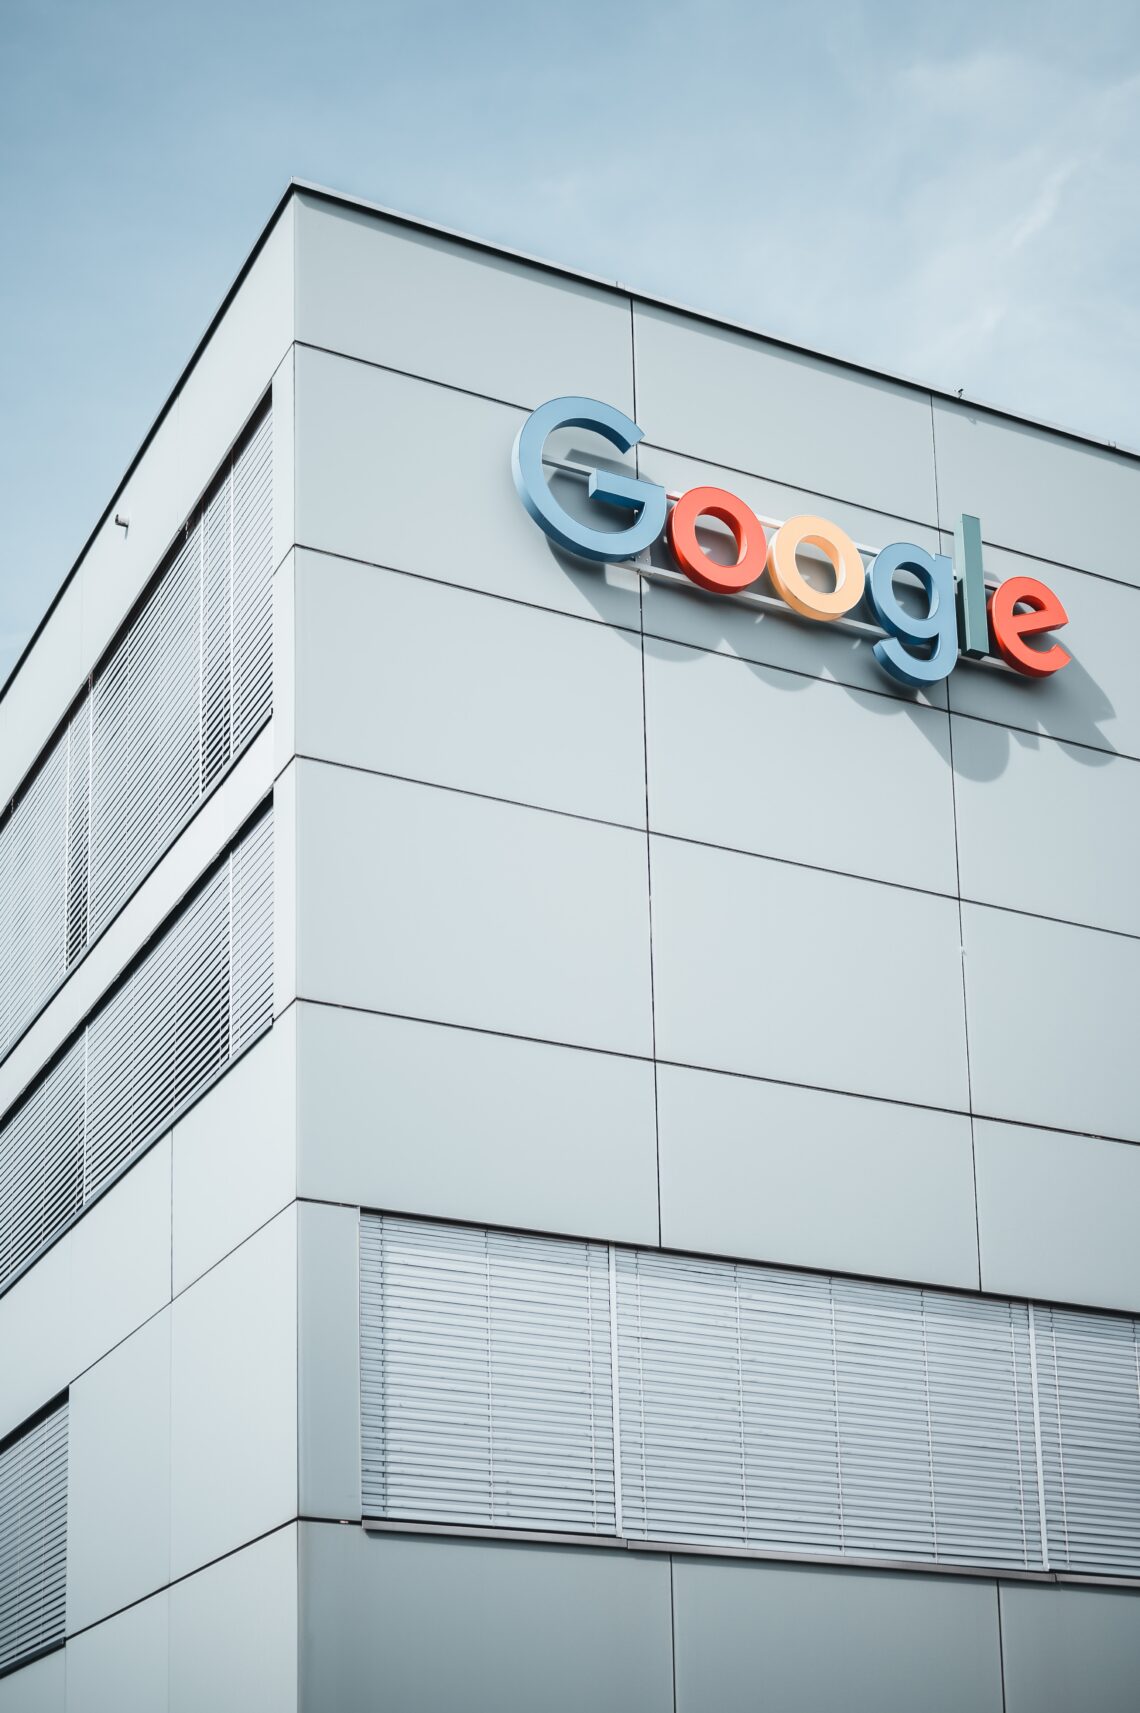 Is Google eating away at the financial industry?